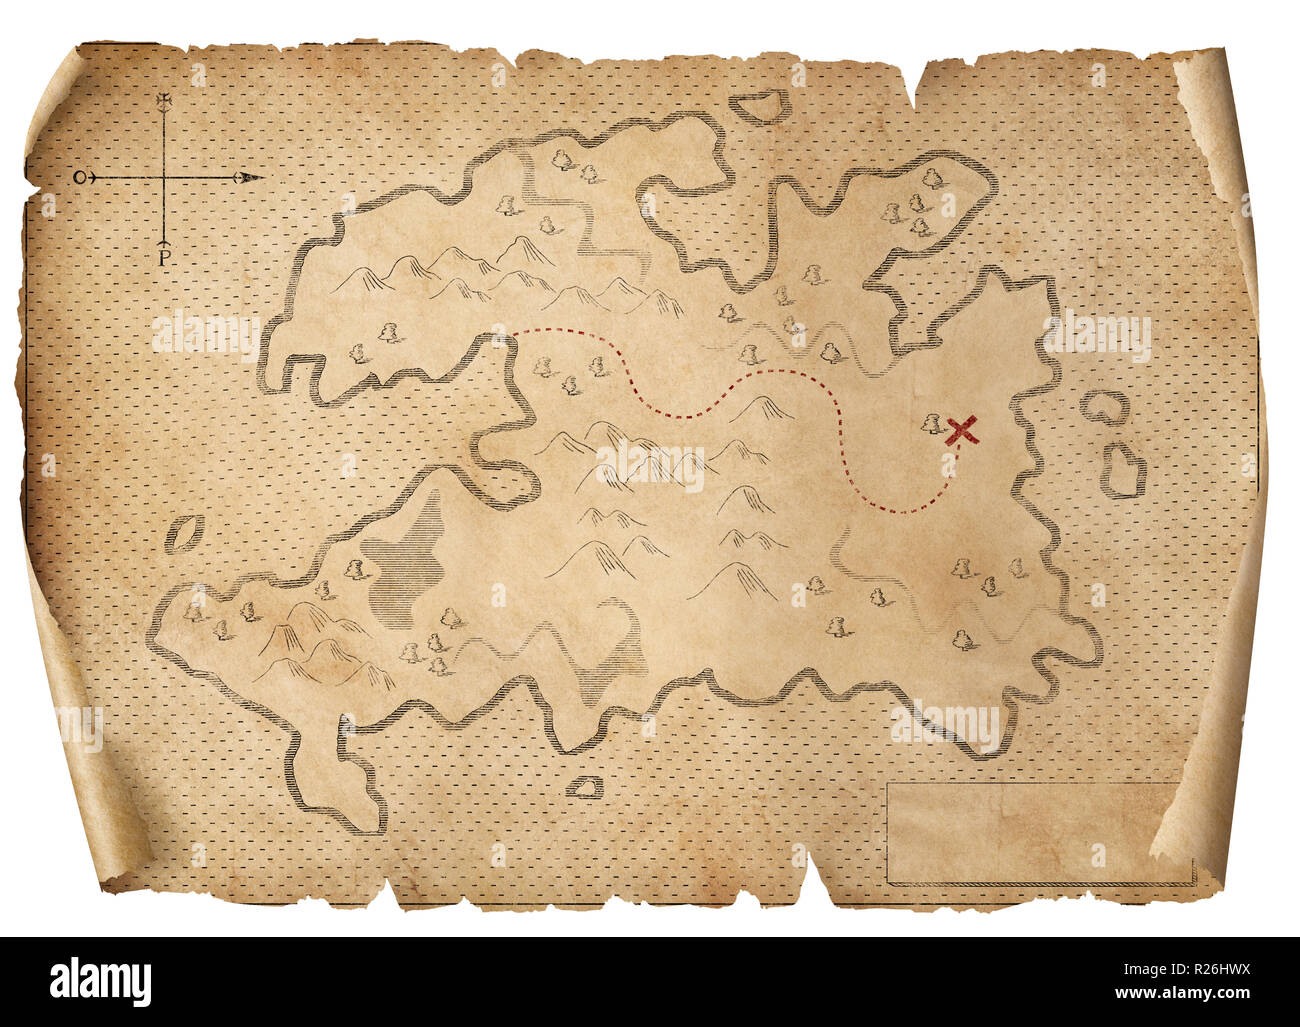 treasure medieval map isolated 3d illustration Stock Photo